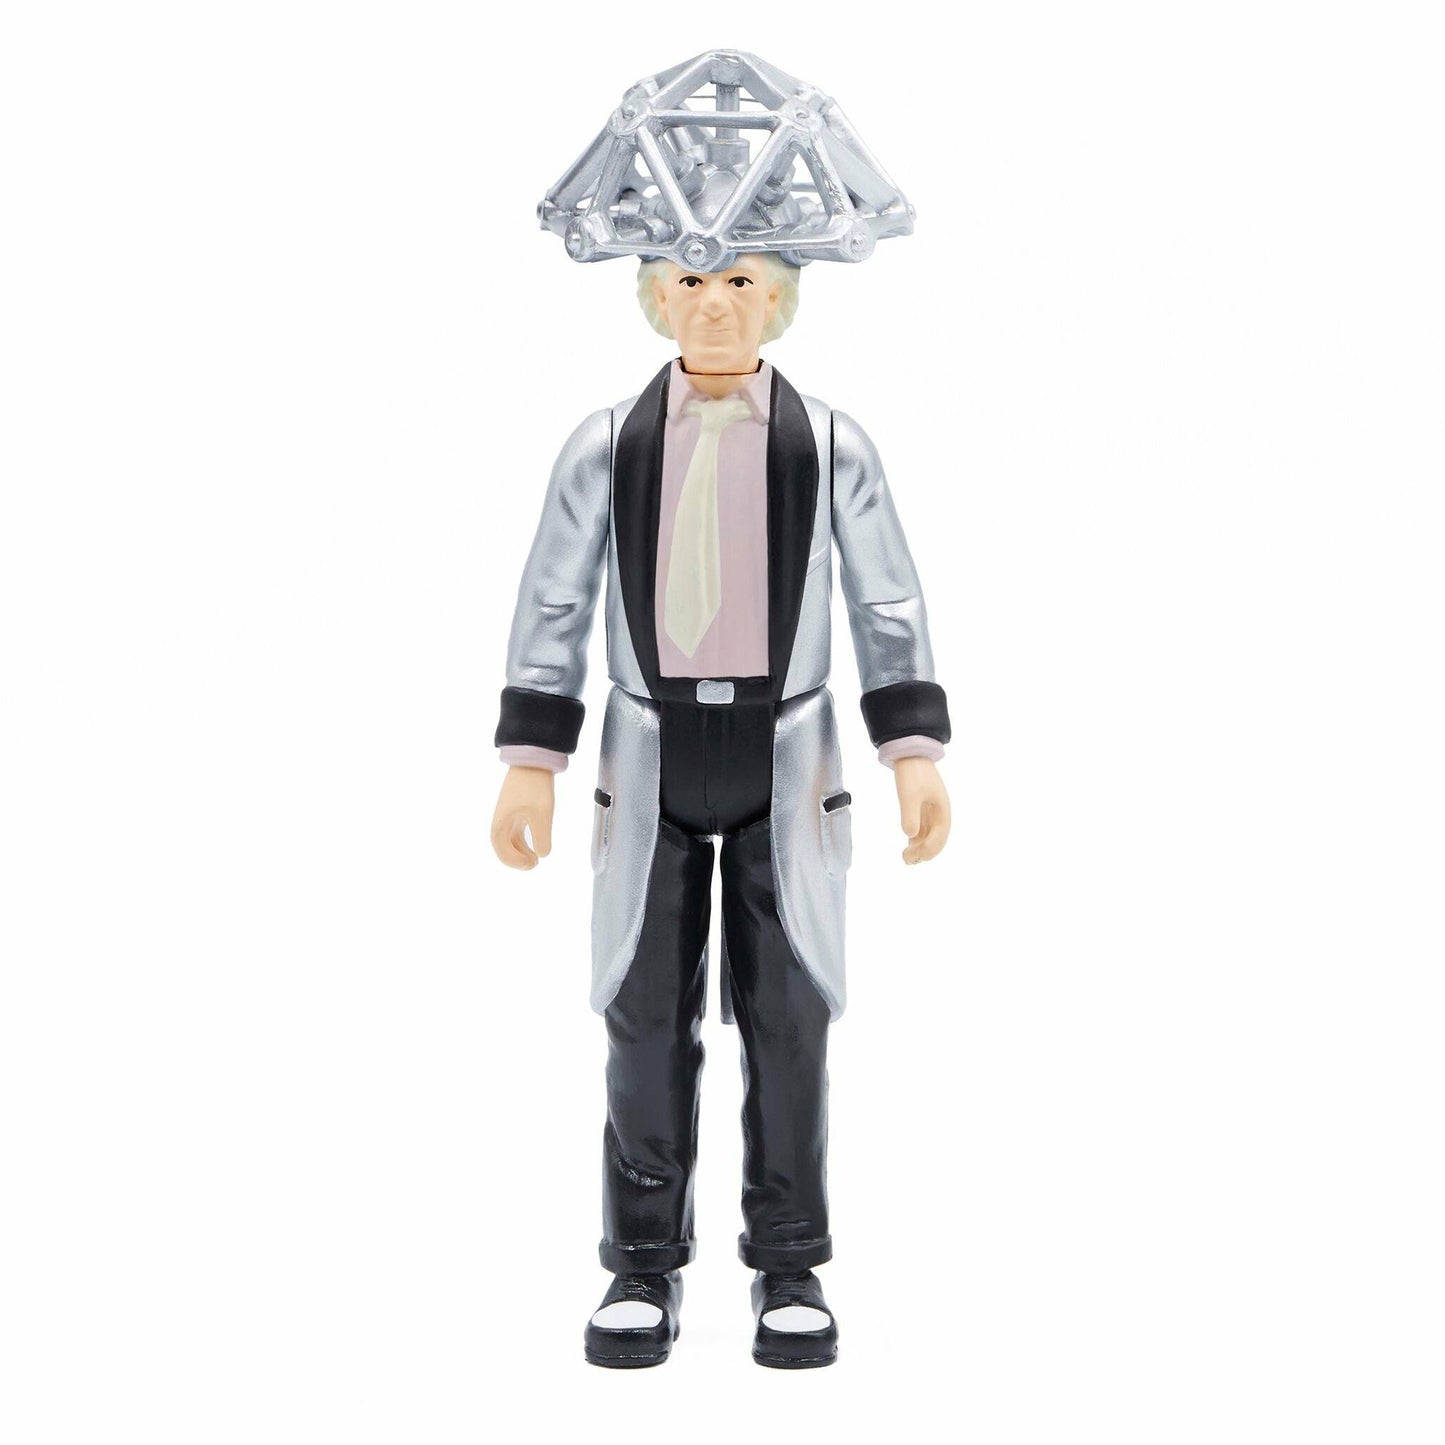 ReAction Back to the Future Fifties Doc 3¾-inch Retro Action Figure Action Figure Super7